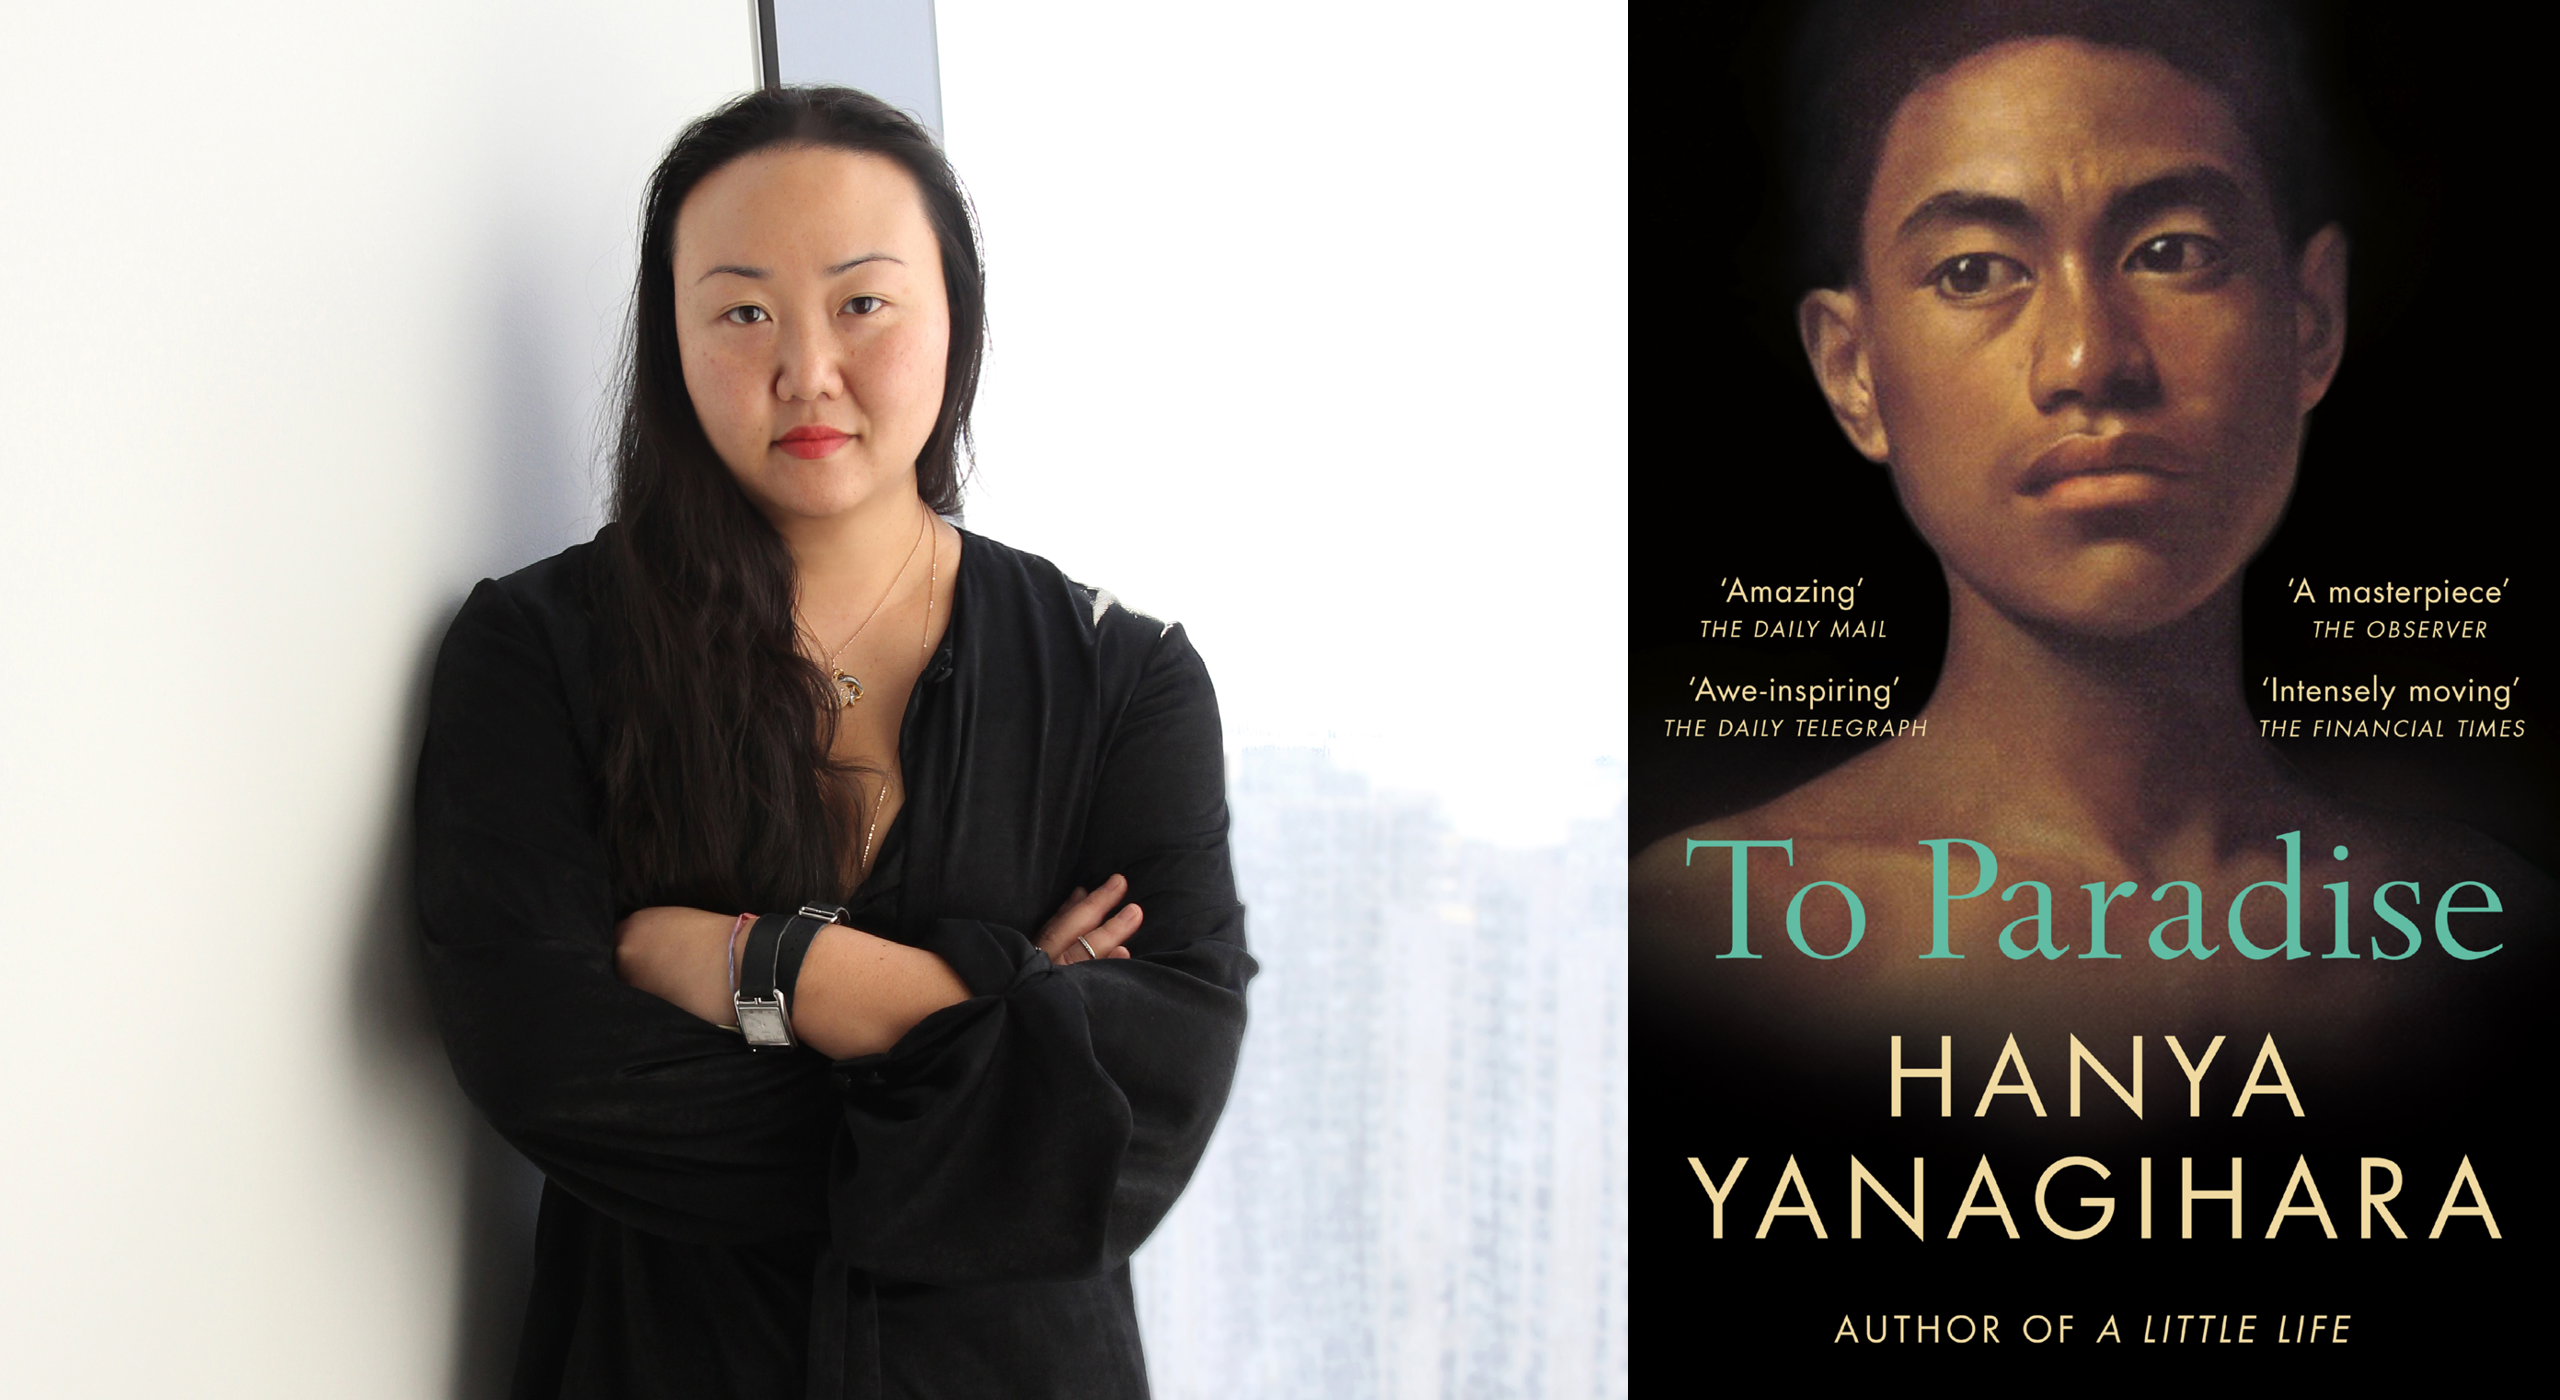 From 'A Little Life' and 'To Paradise': Hanya Yanagihara at UEA